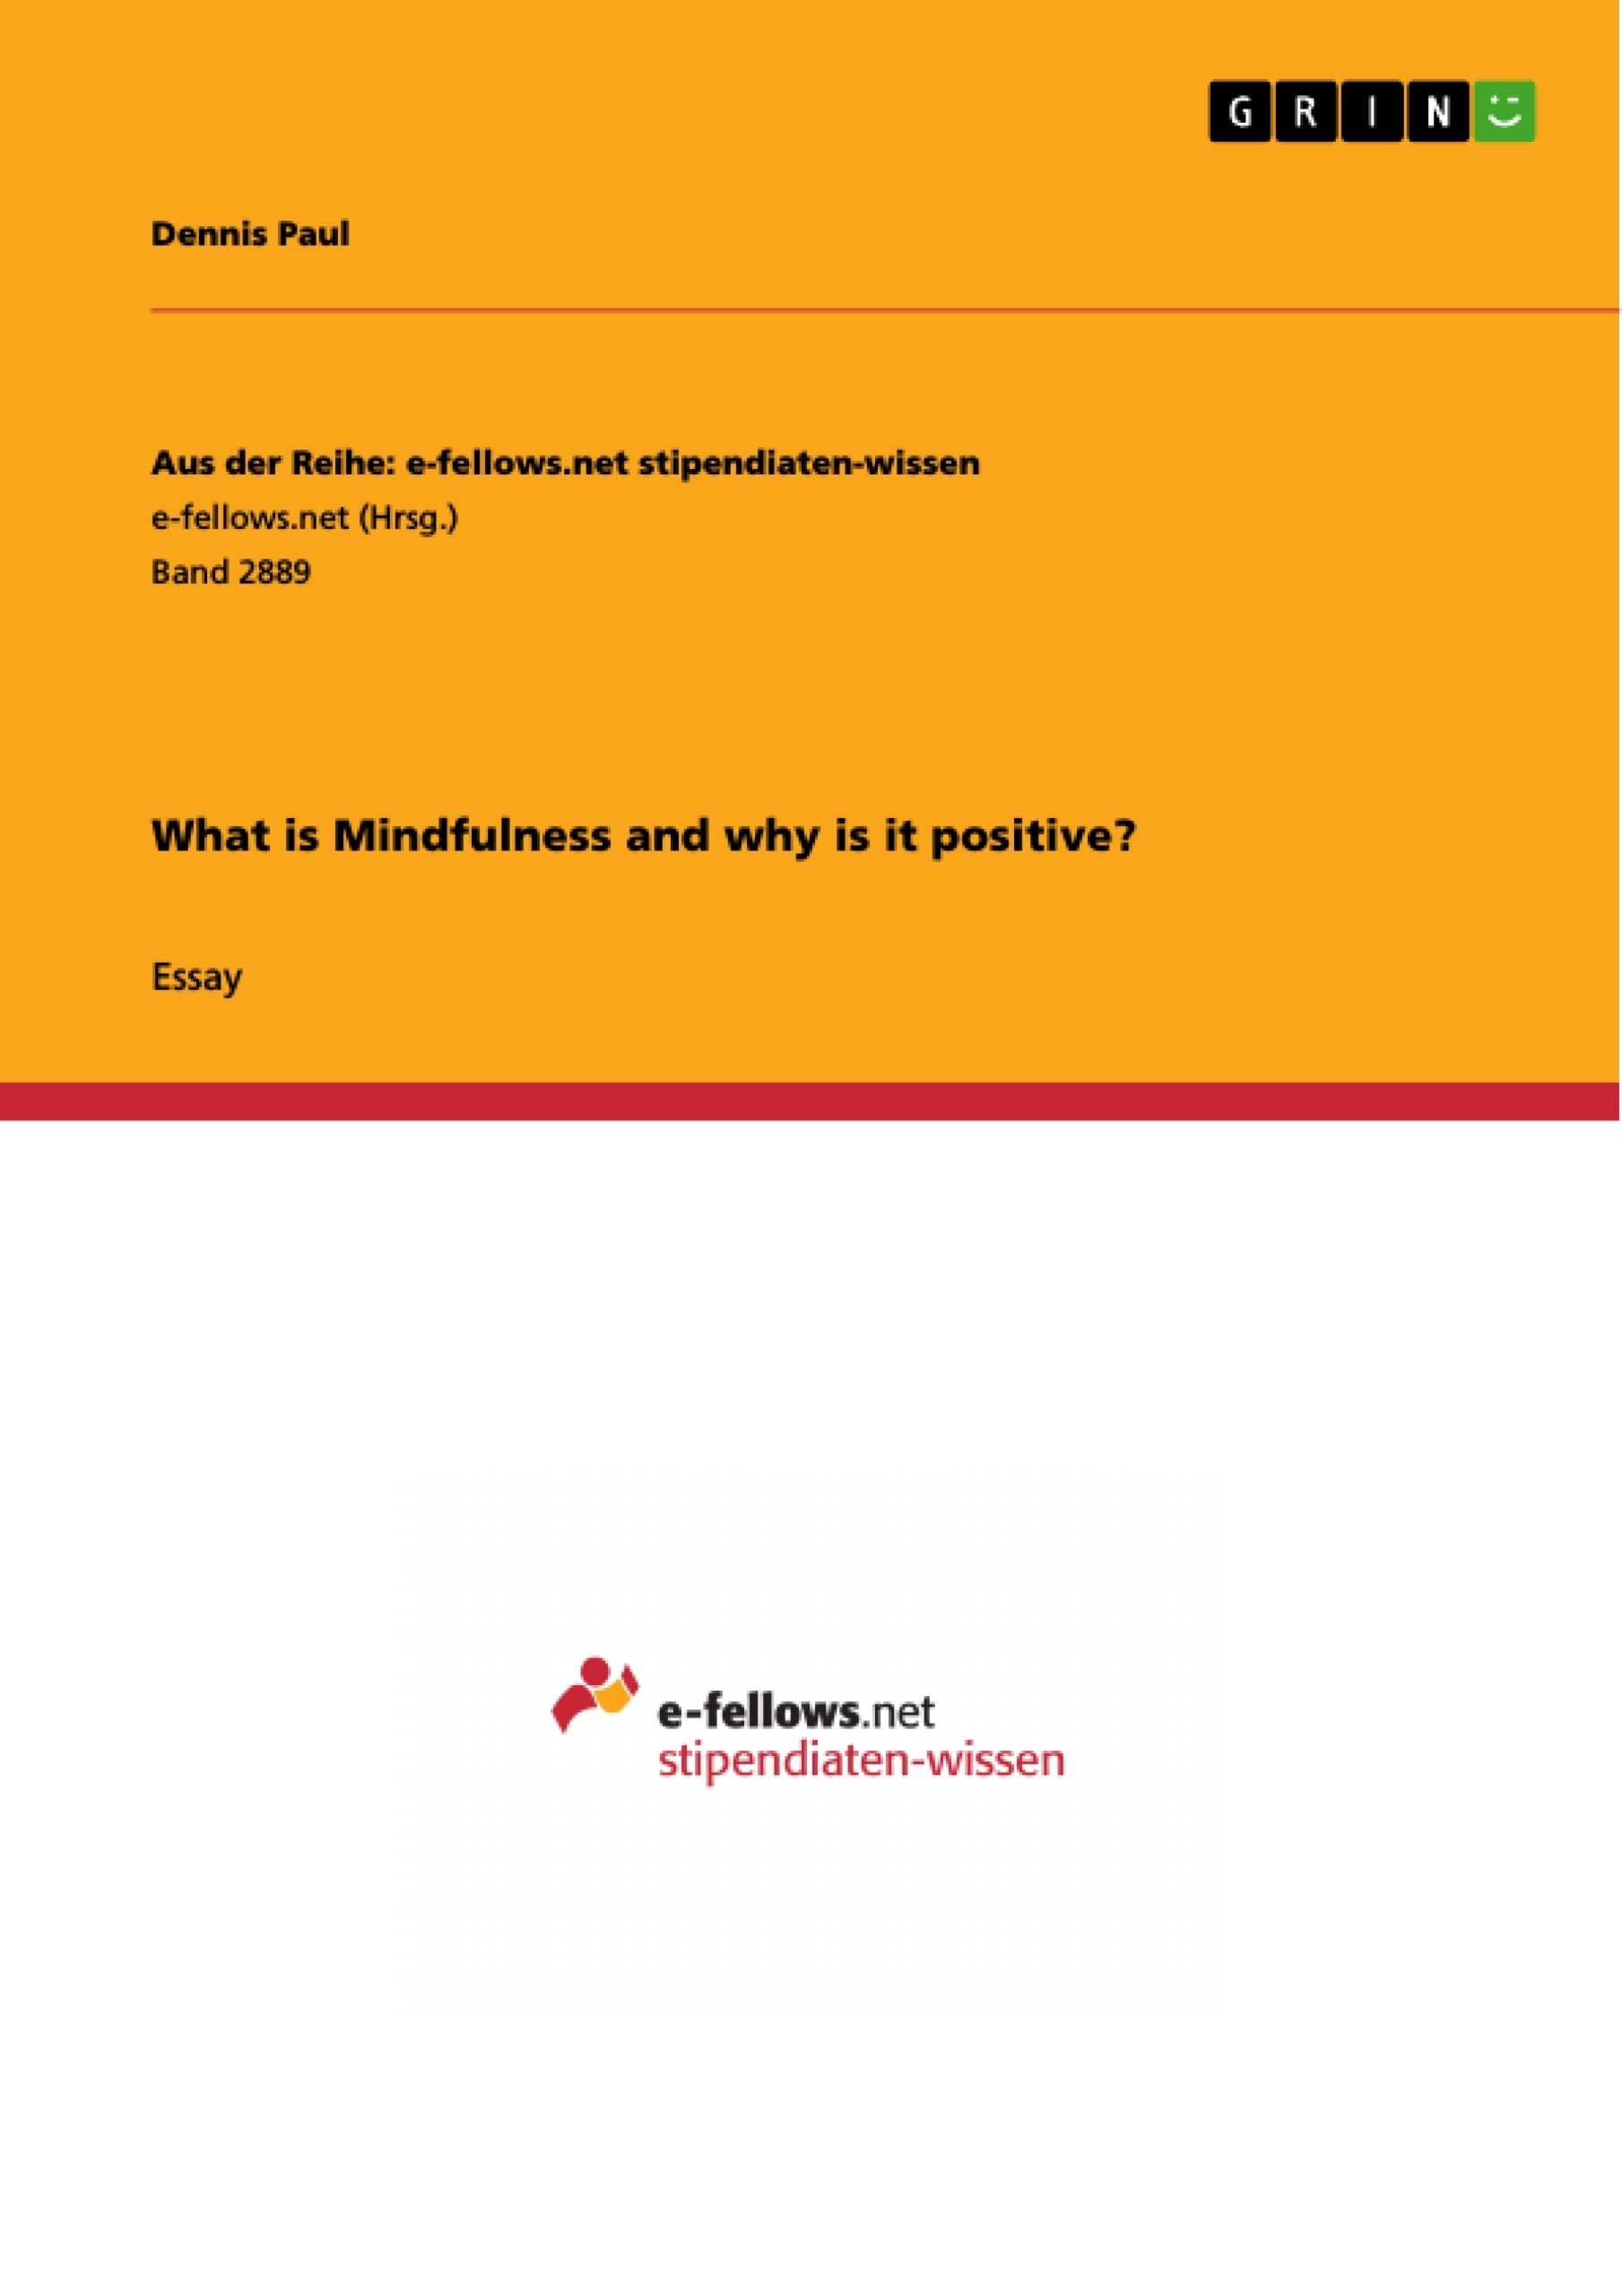 Titre: What is Mindfulness and why is it positive?